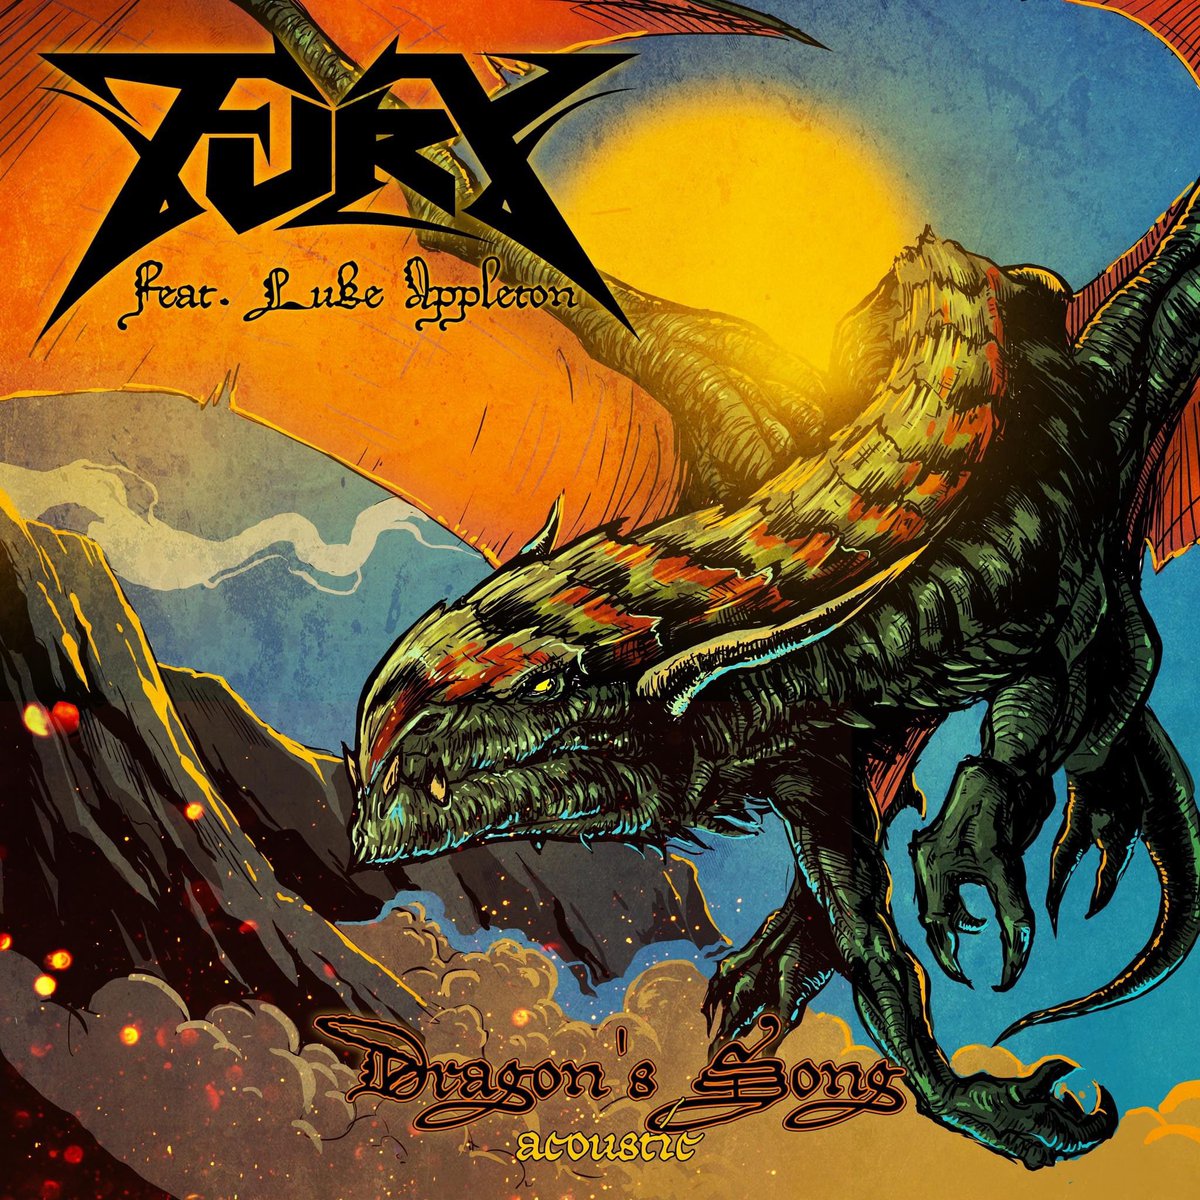 My collaboration video and song with Fury is now available on all streaming platforms! This is, ‘Dragon’s Song’ @furyofficial #lukeappleton #fury @BeckyB_Bass #beckybaldwinbass